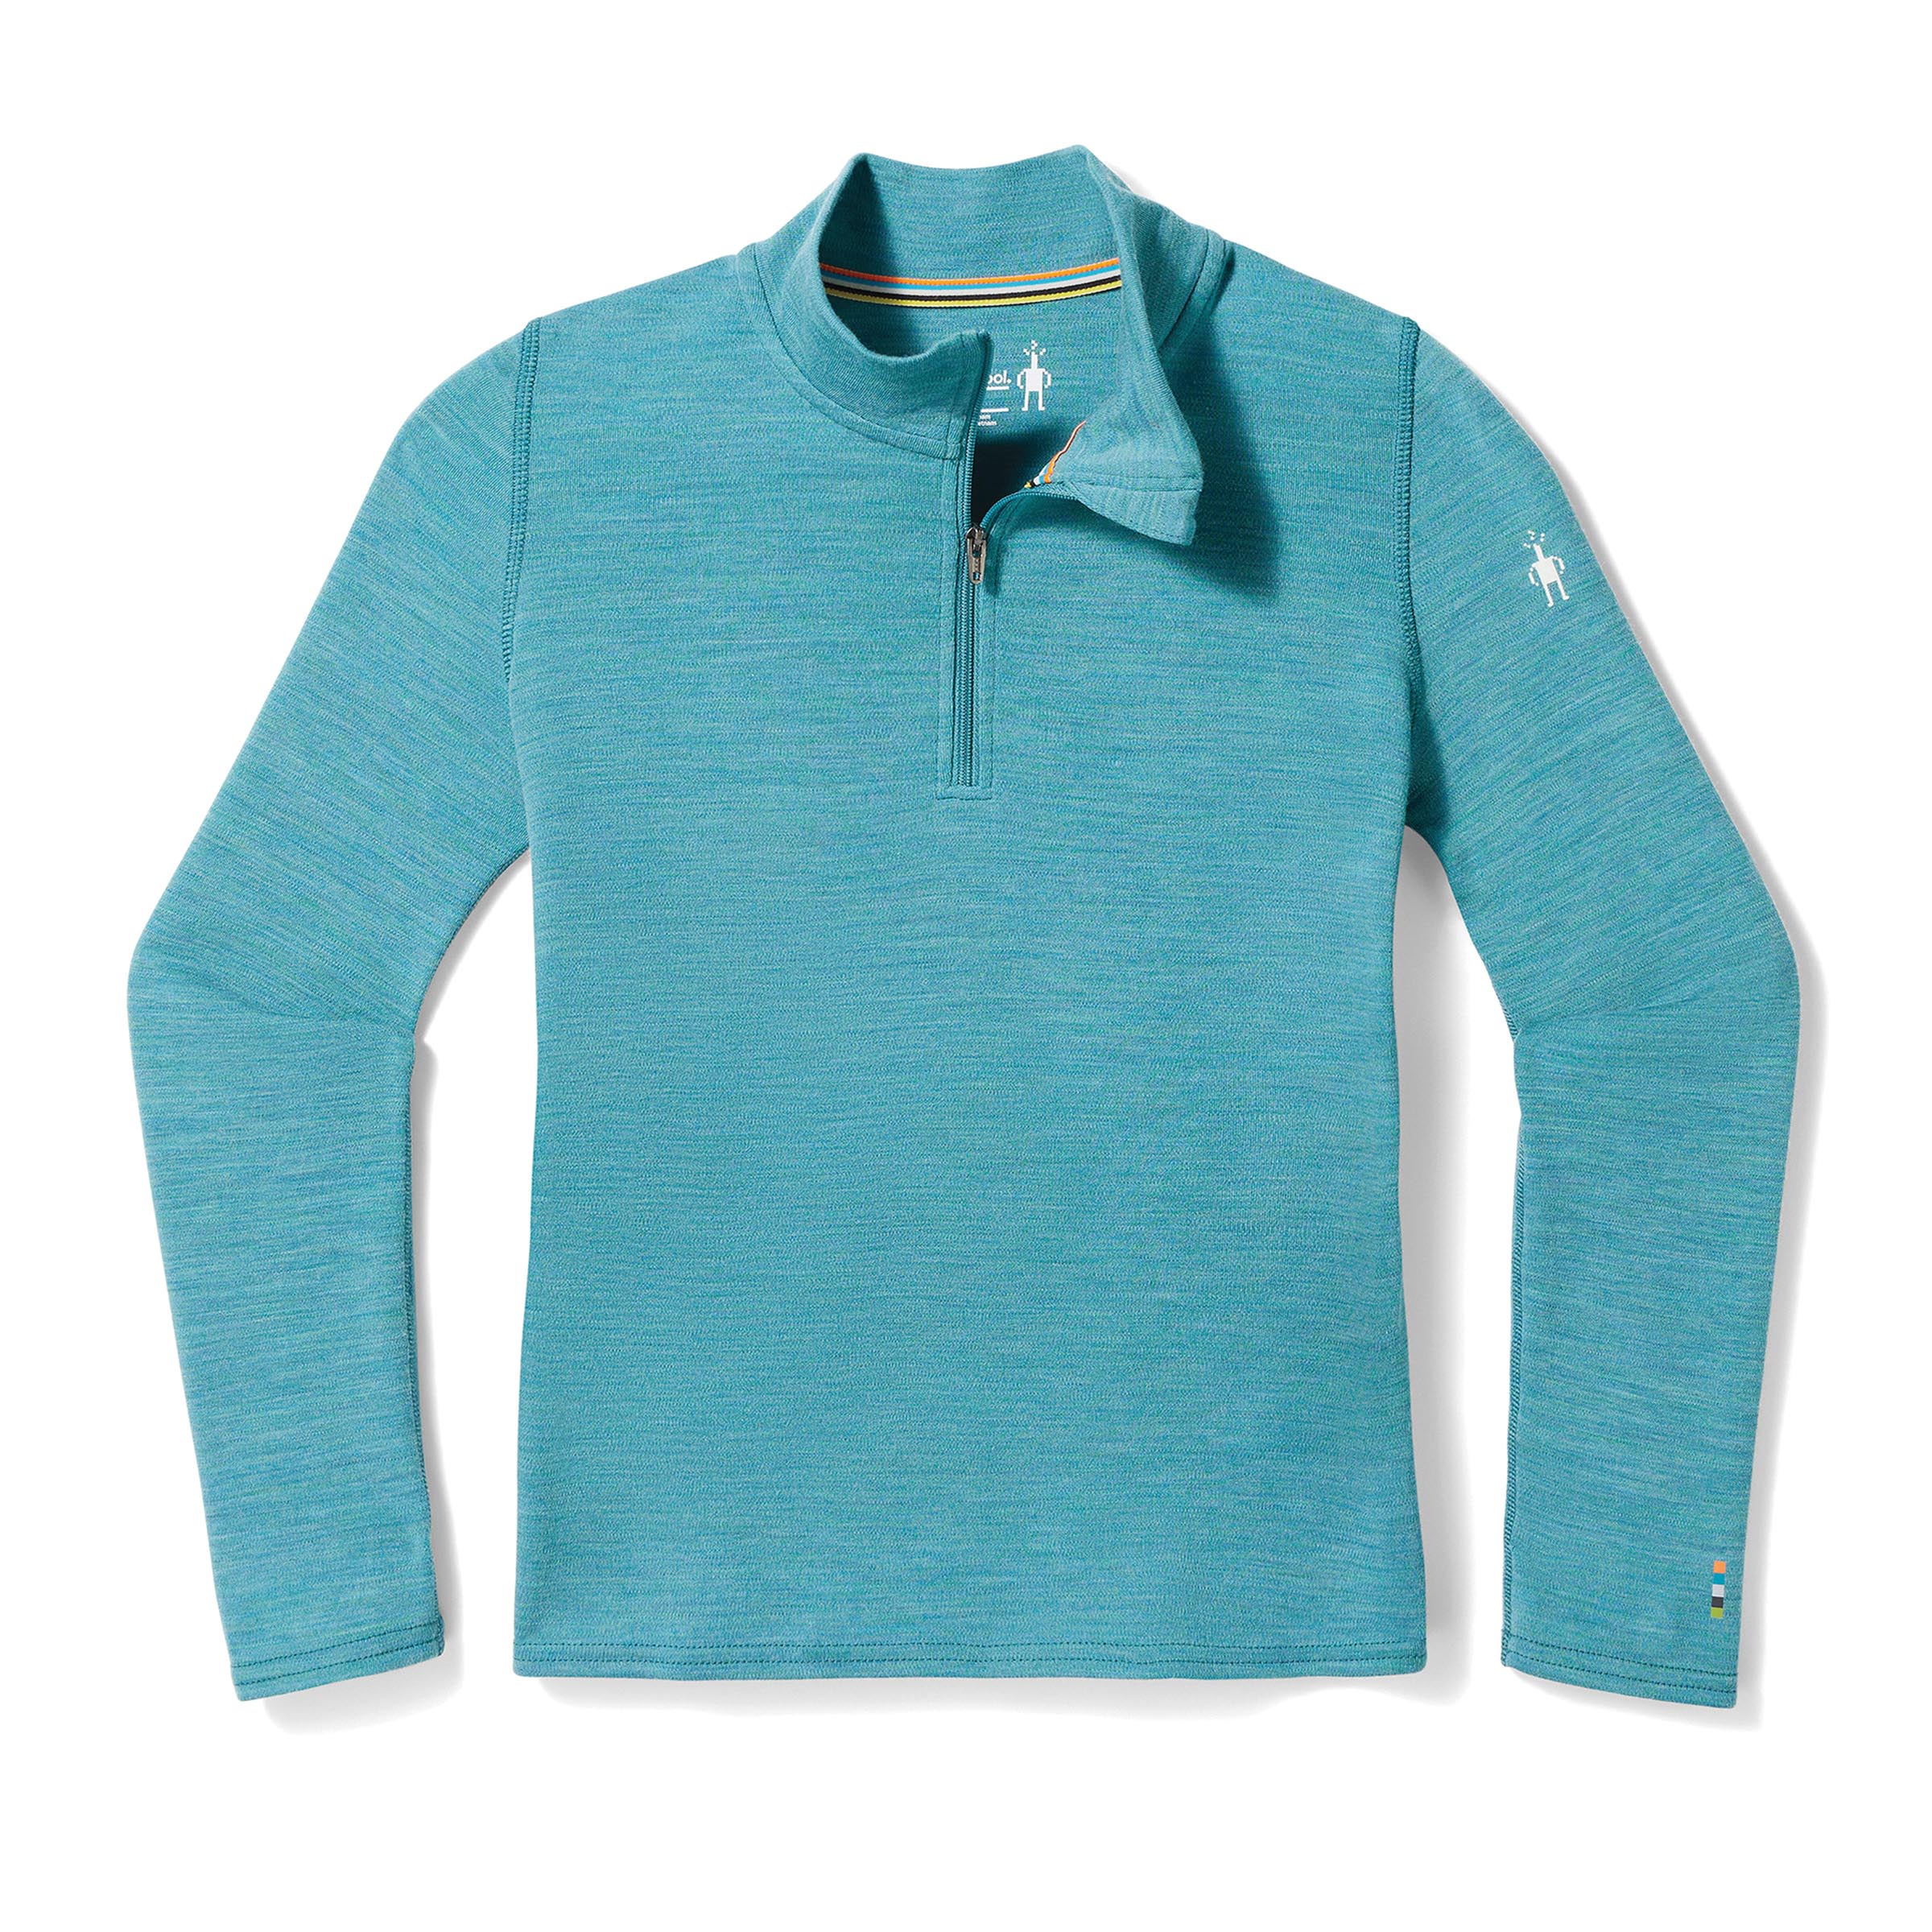 Classic Thermal Merino Base Layer 1/4 Zip Women's – Feathered Friends